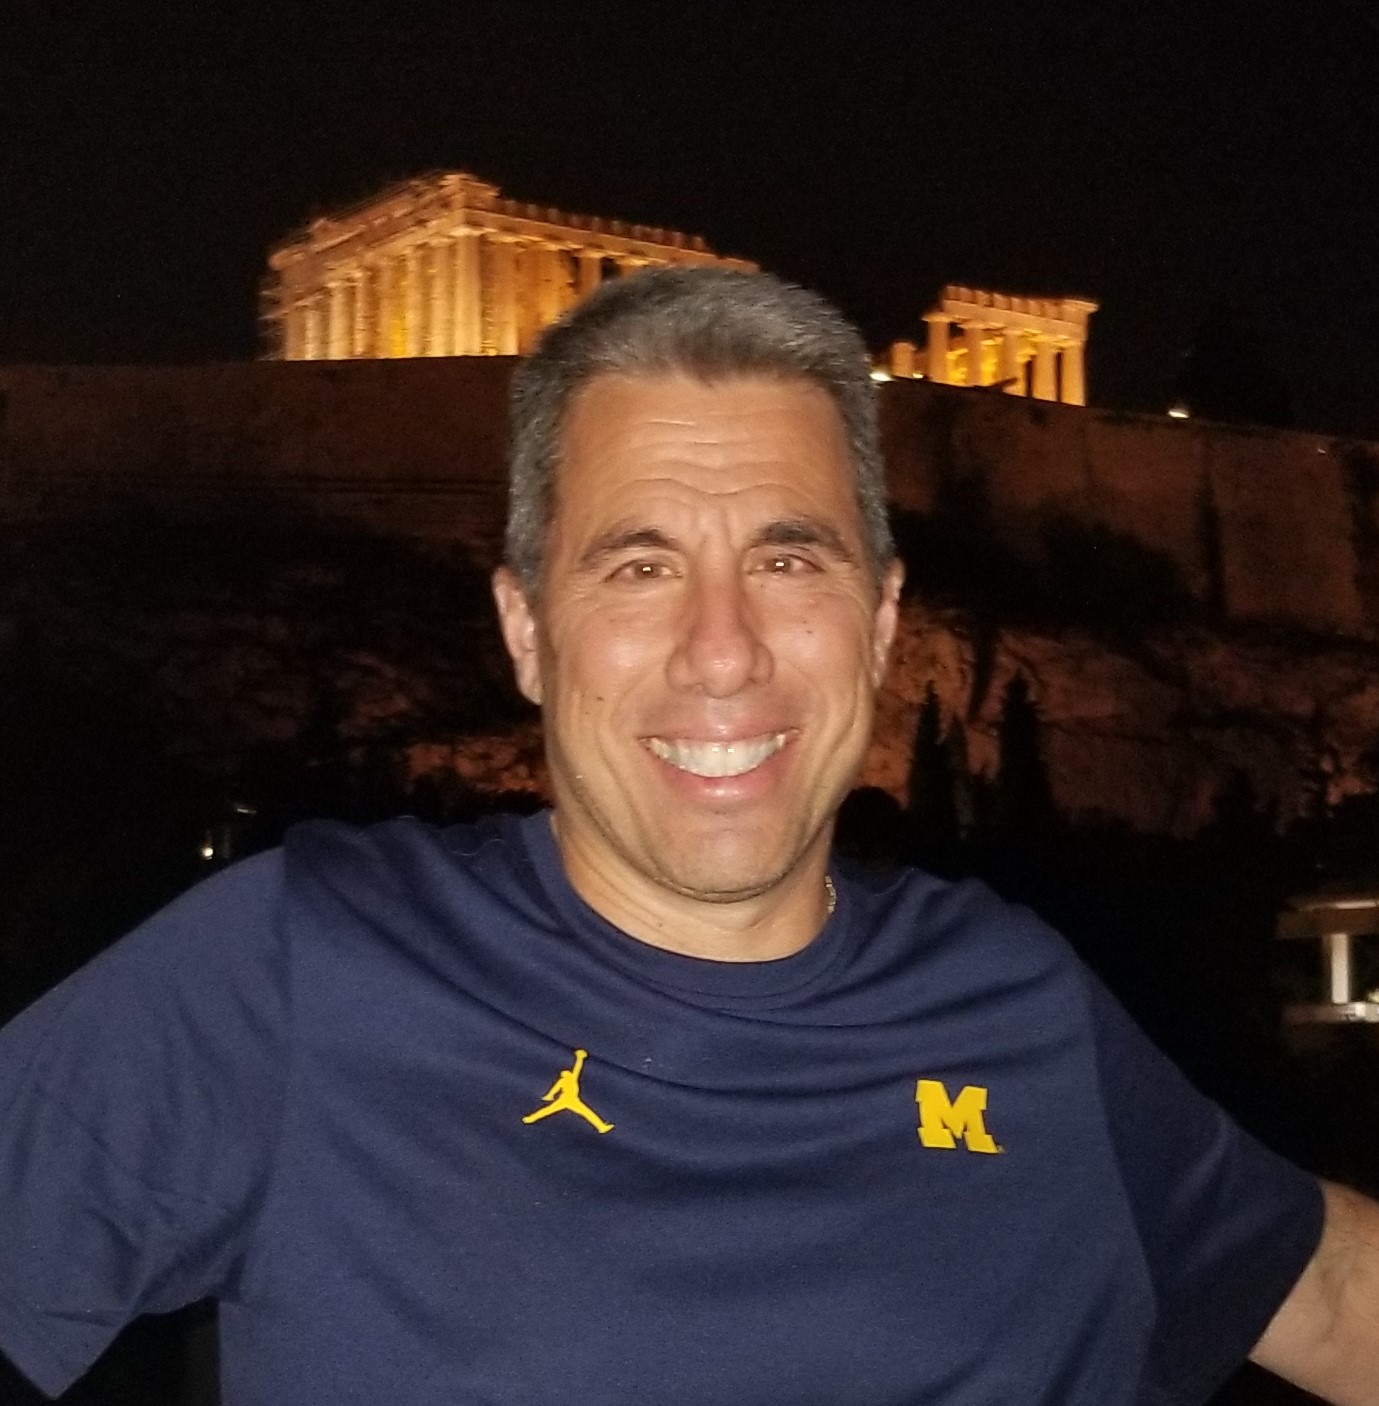 Nick Roopas, ’88, took a nighttime photo at the Acropolis in Greece.